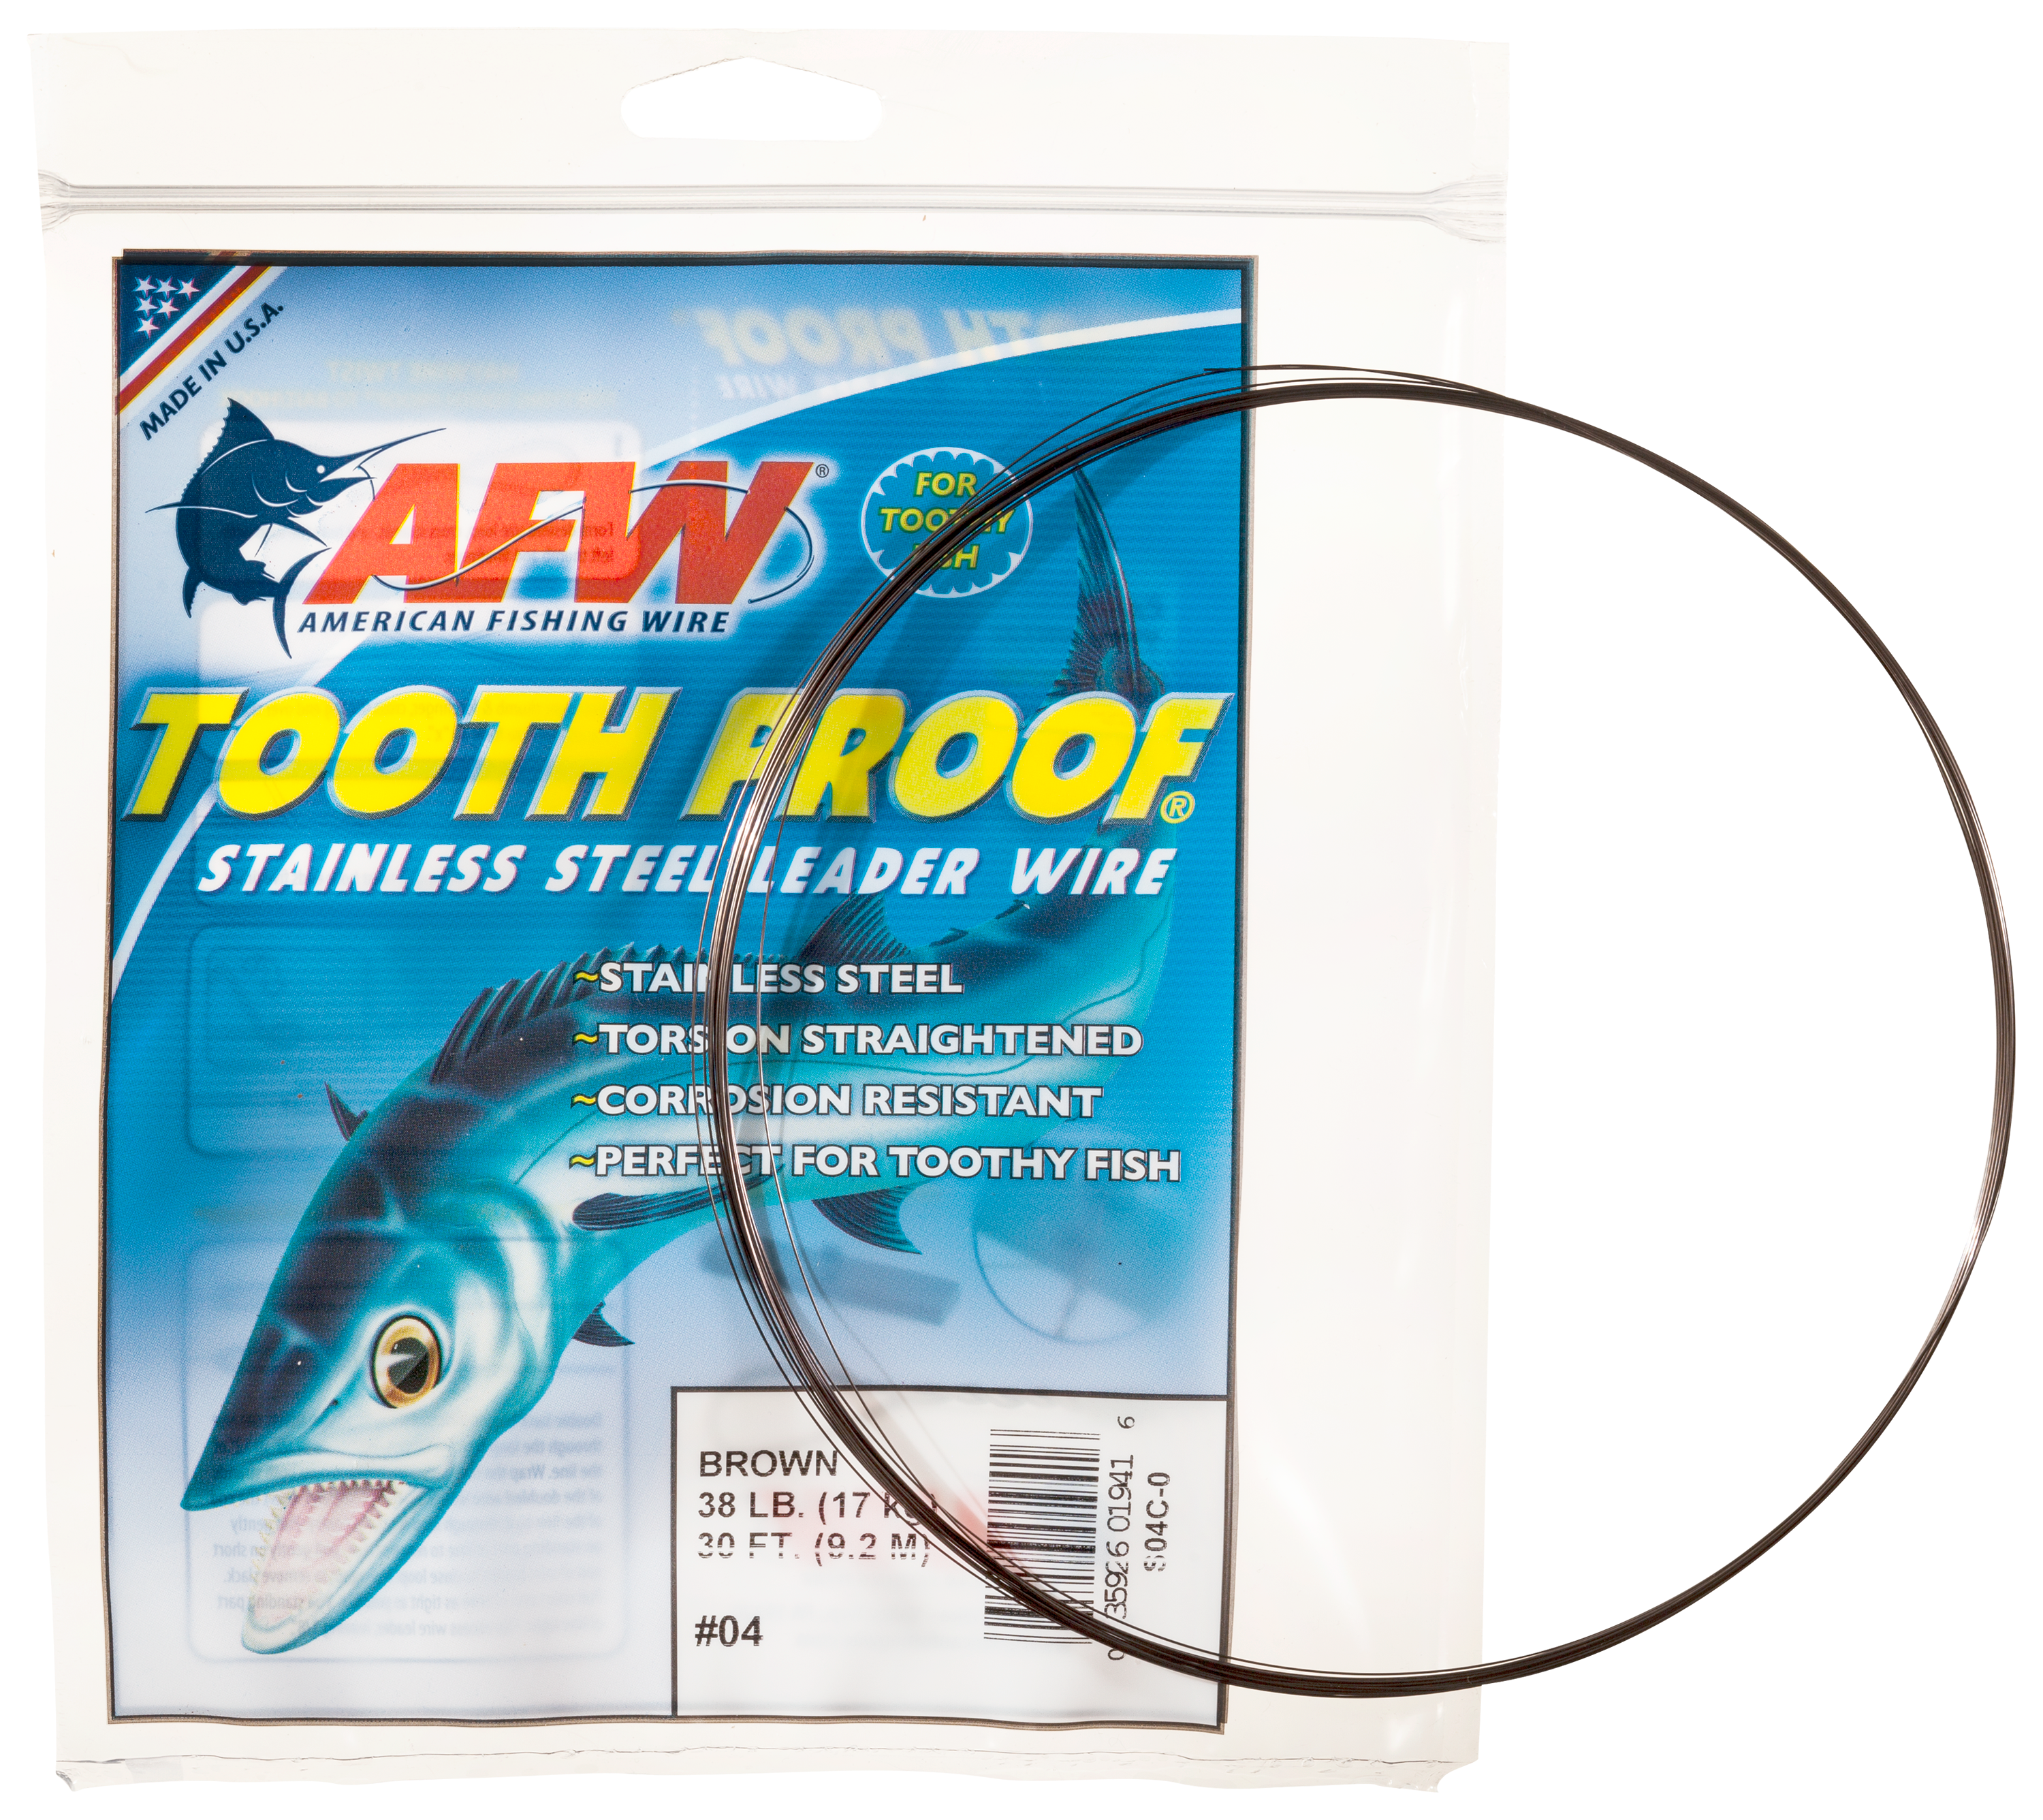 American Fishing Wire Tooth Proof Stainless Steel Leader Wire - 105 lb. Test